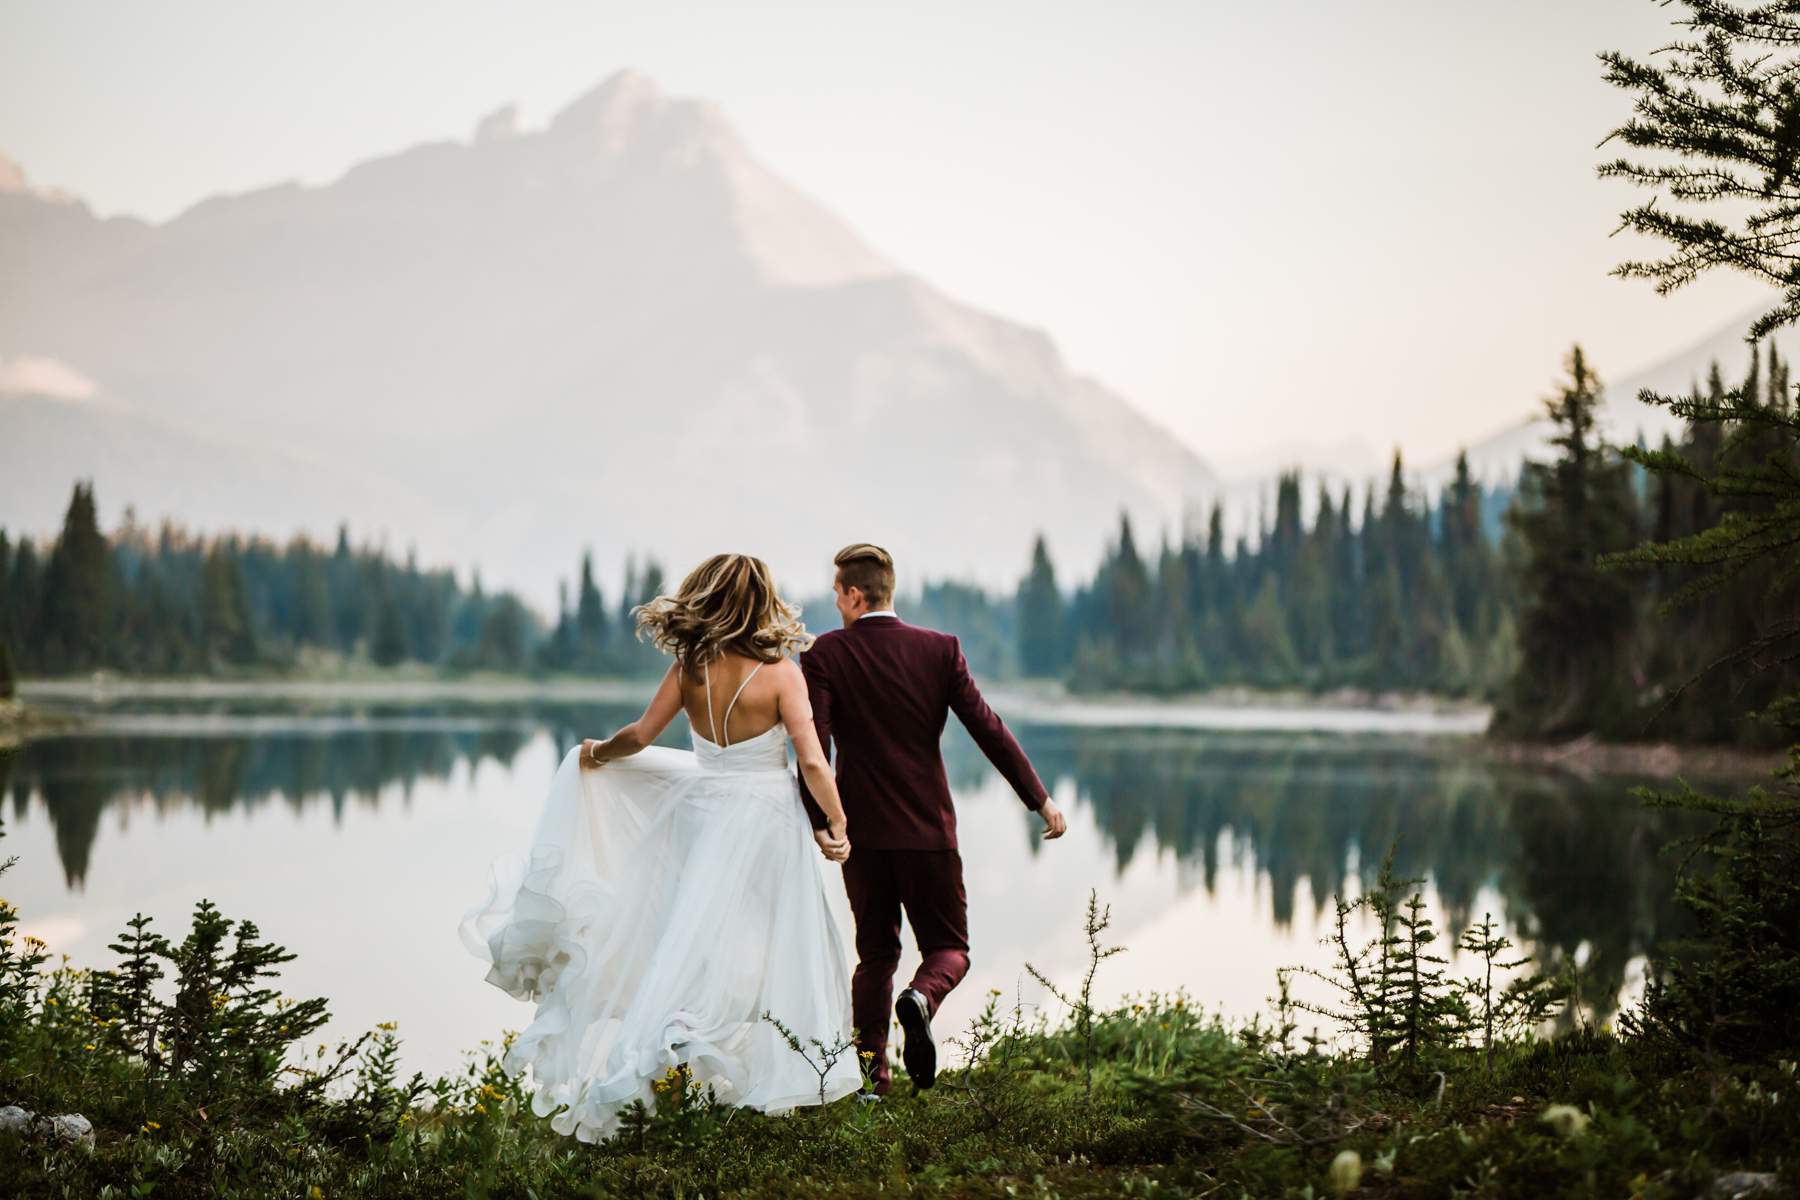 Banff Helicopter Elopement Photographers - Image 21